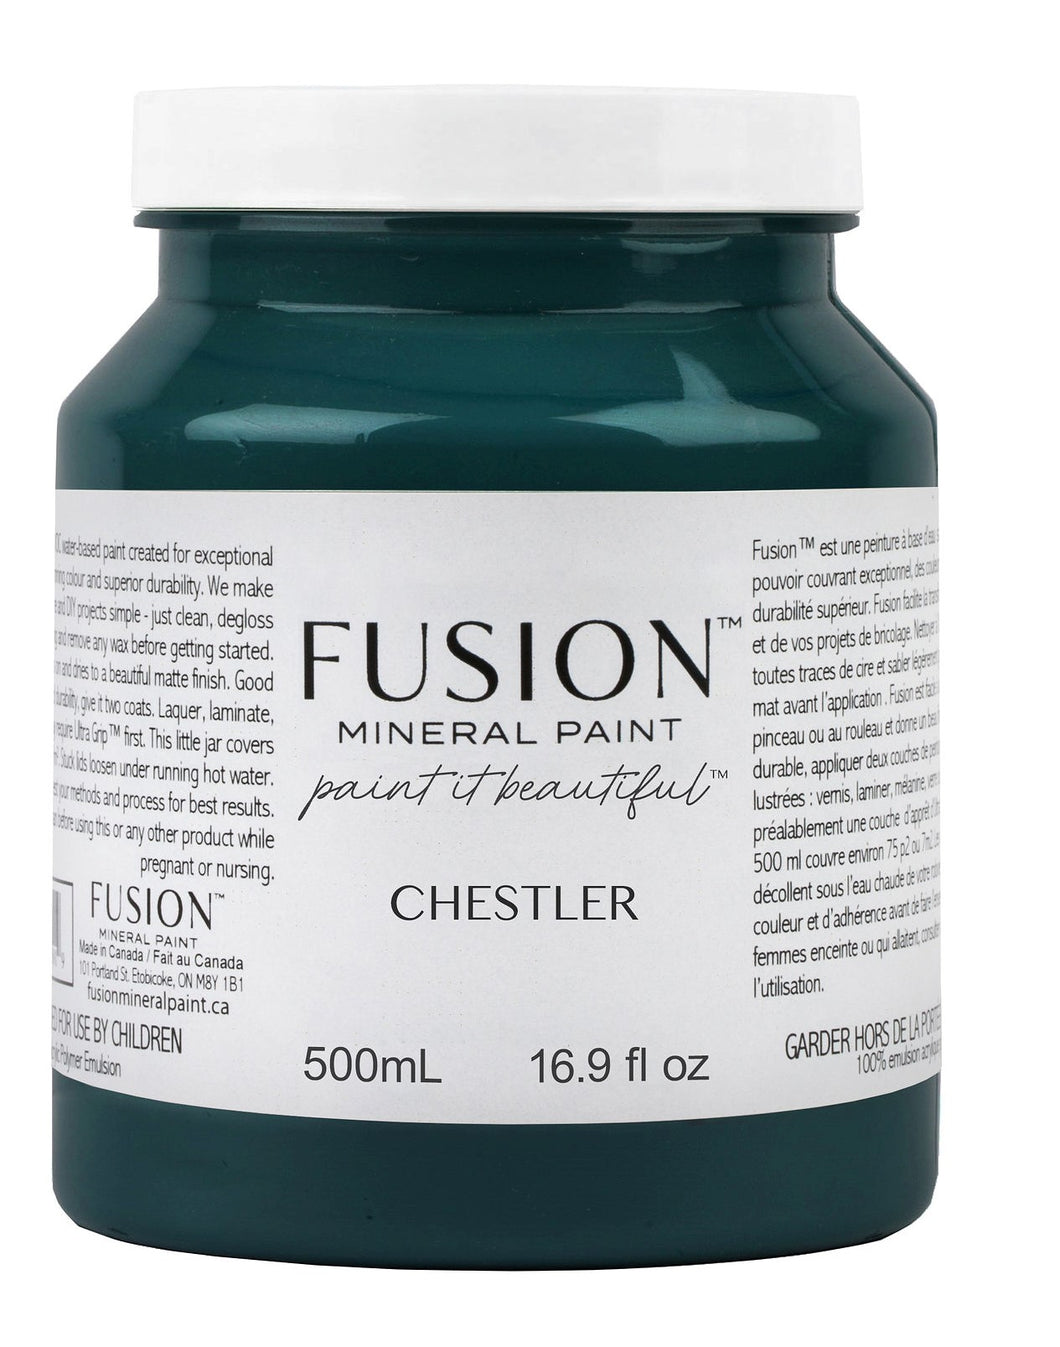 Fusion Mineral Paint- Chestler- 500ml